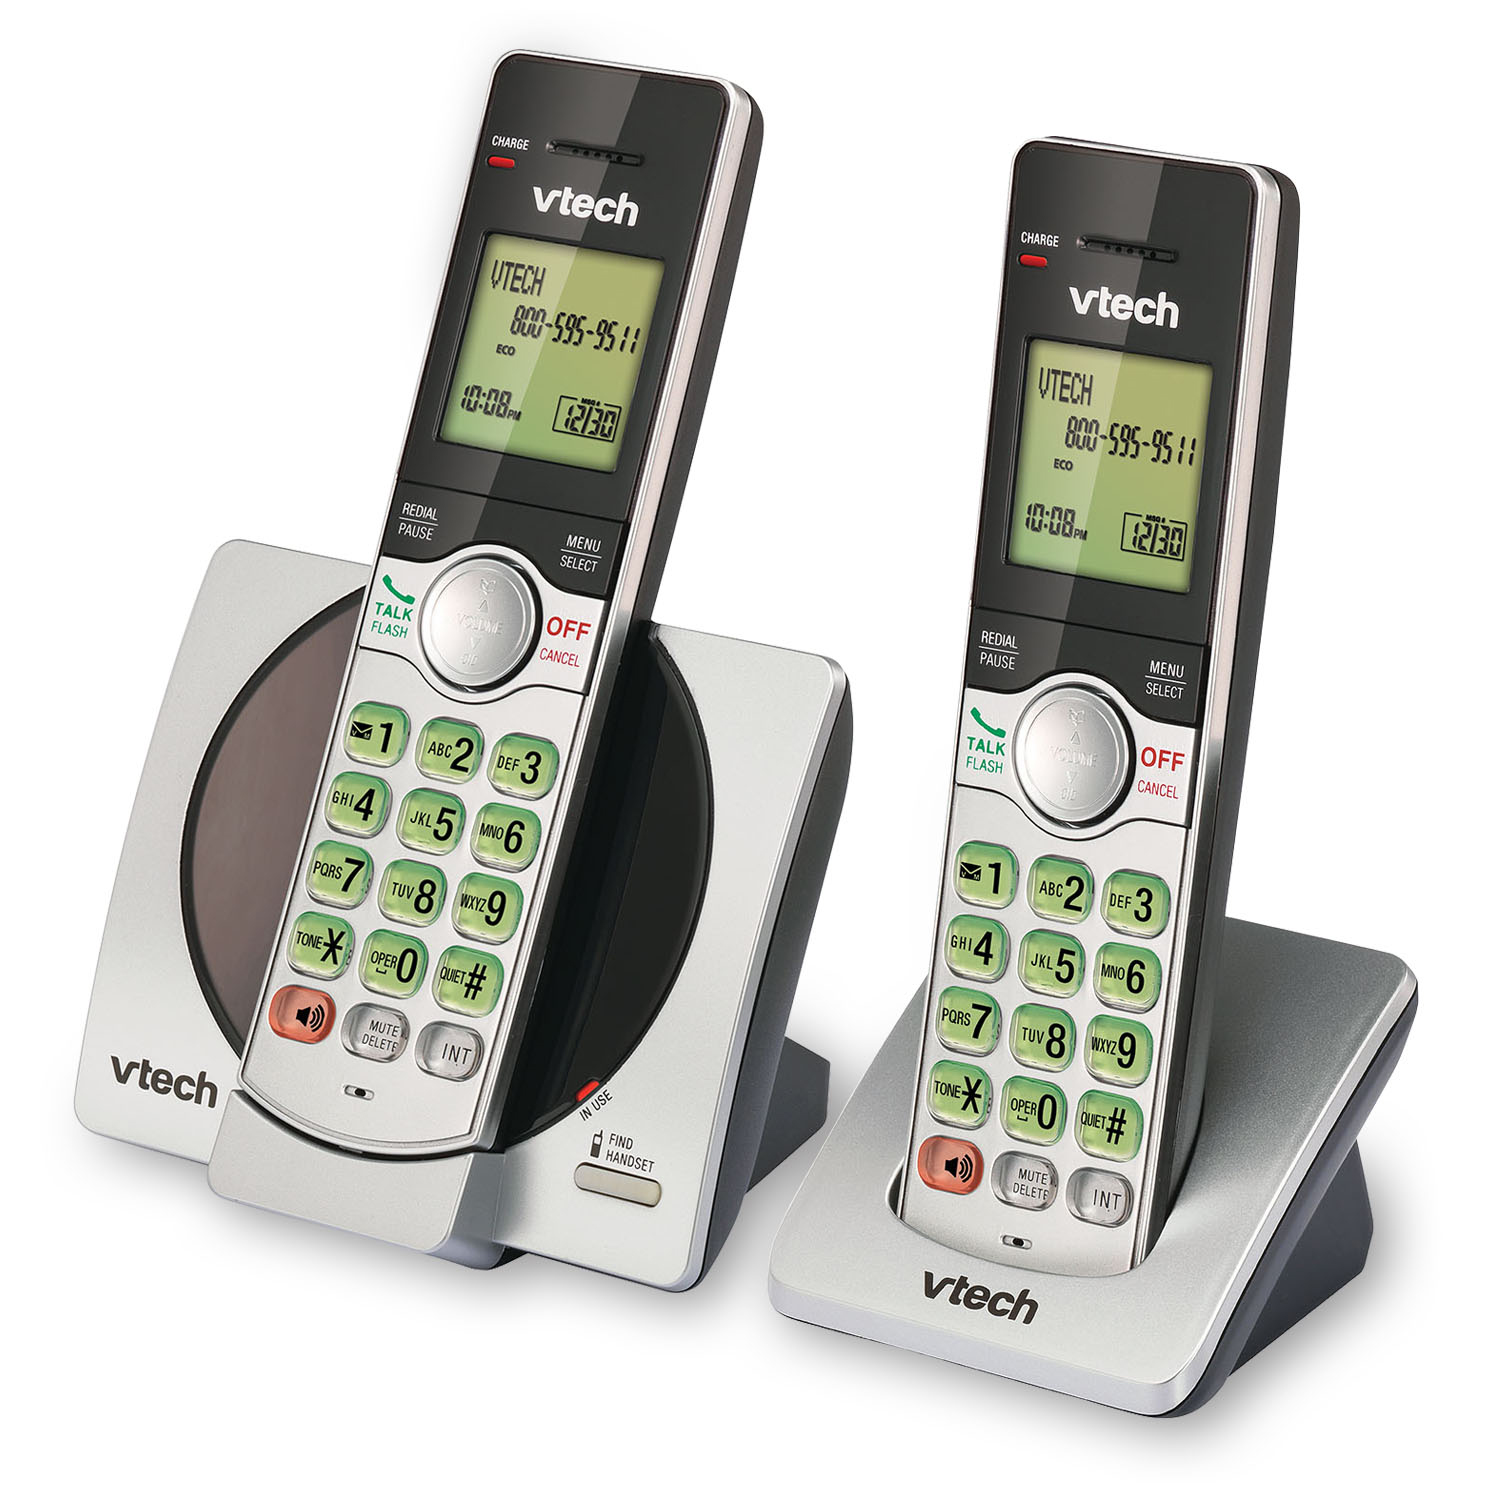 VTech CS6919-2 DECT 6.0 Cordless Phone with Caller ID and Handset Speakerphone, 2 Handsets, Silver/Black - image 3 of 4